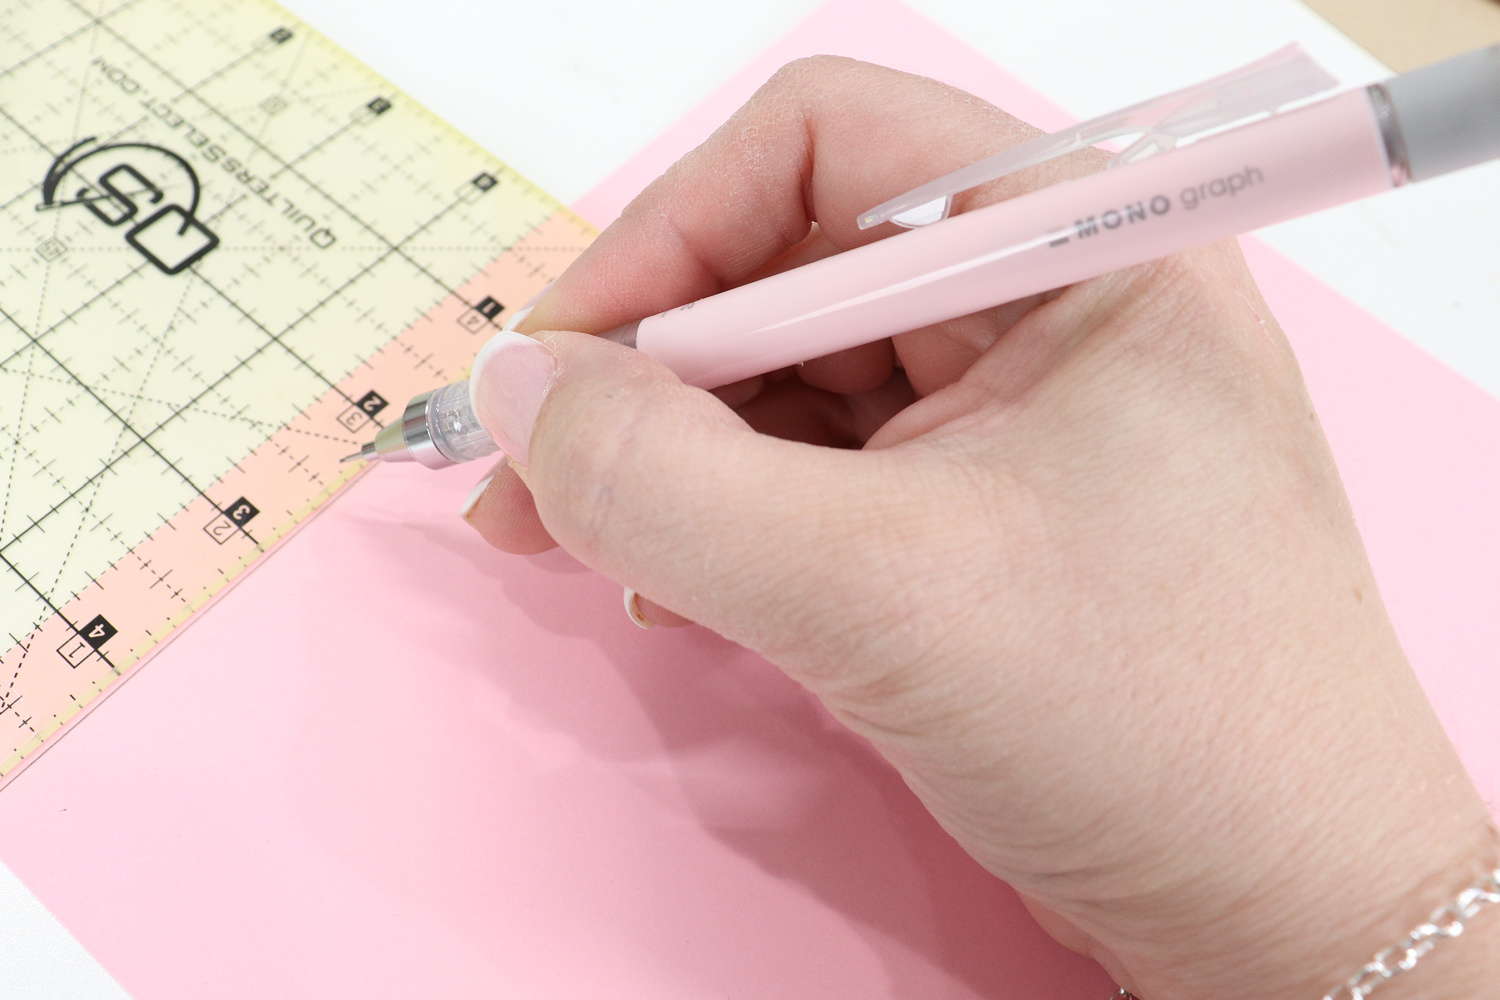 Image contains Amy’s hand holding a pastel pink MONO Graph mechanical pencil. She is drawing a line on a piece of pink cardstock, measured by a quilting ruler. 